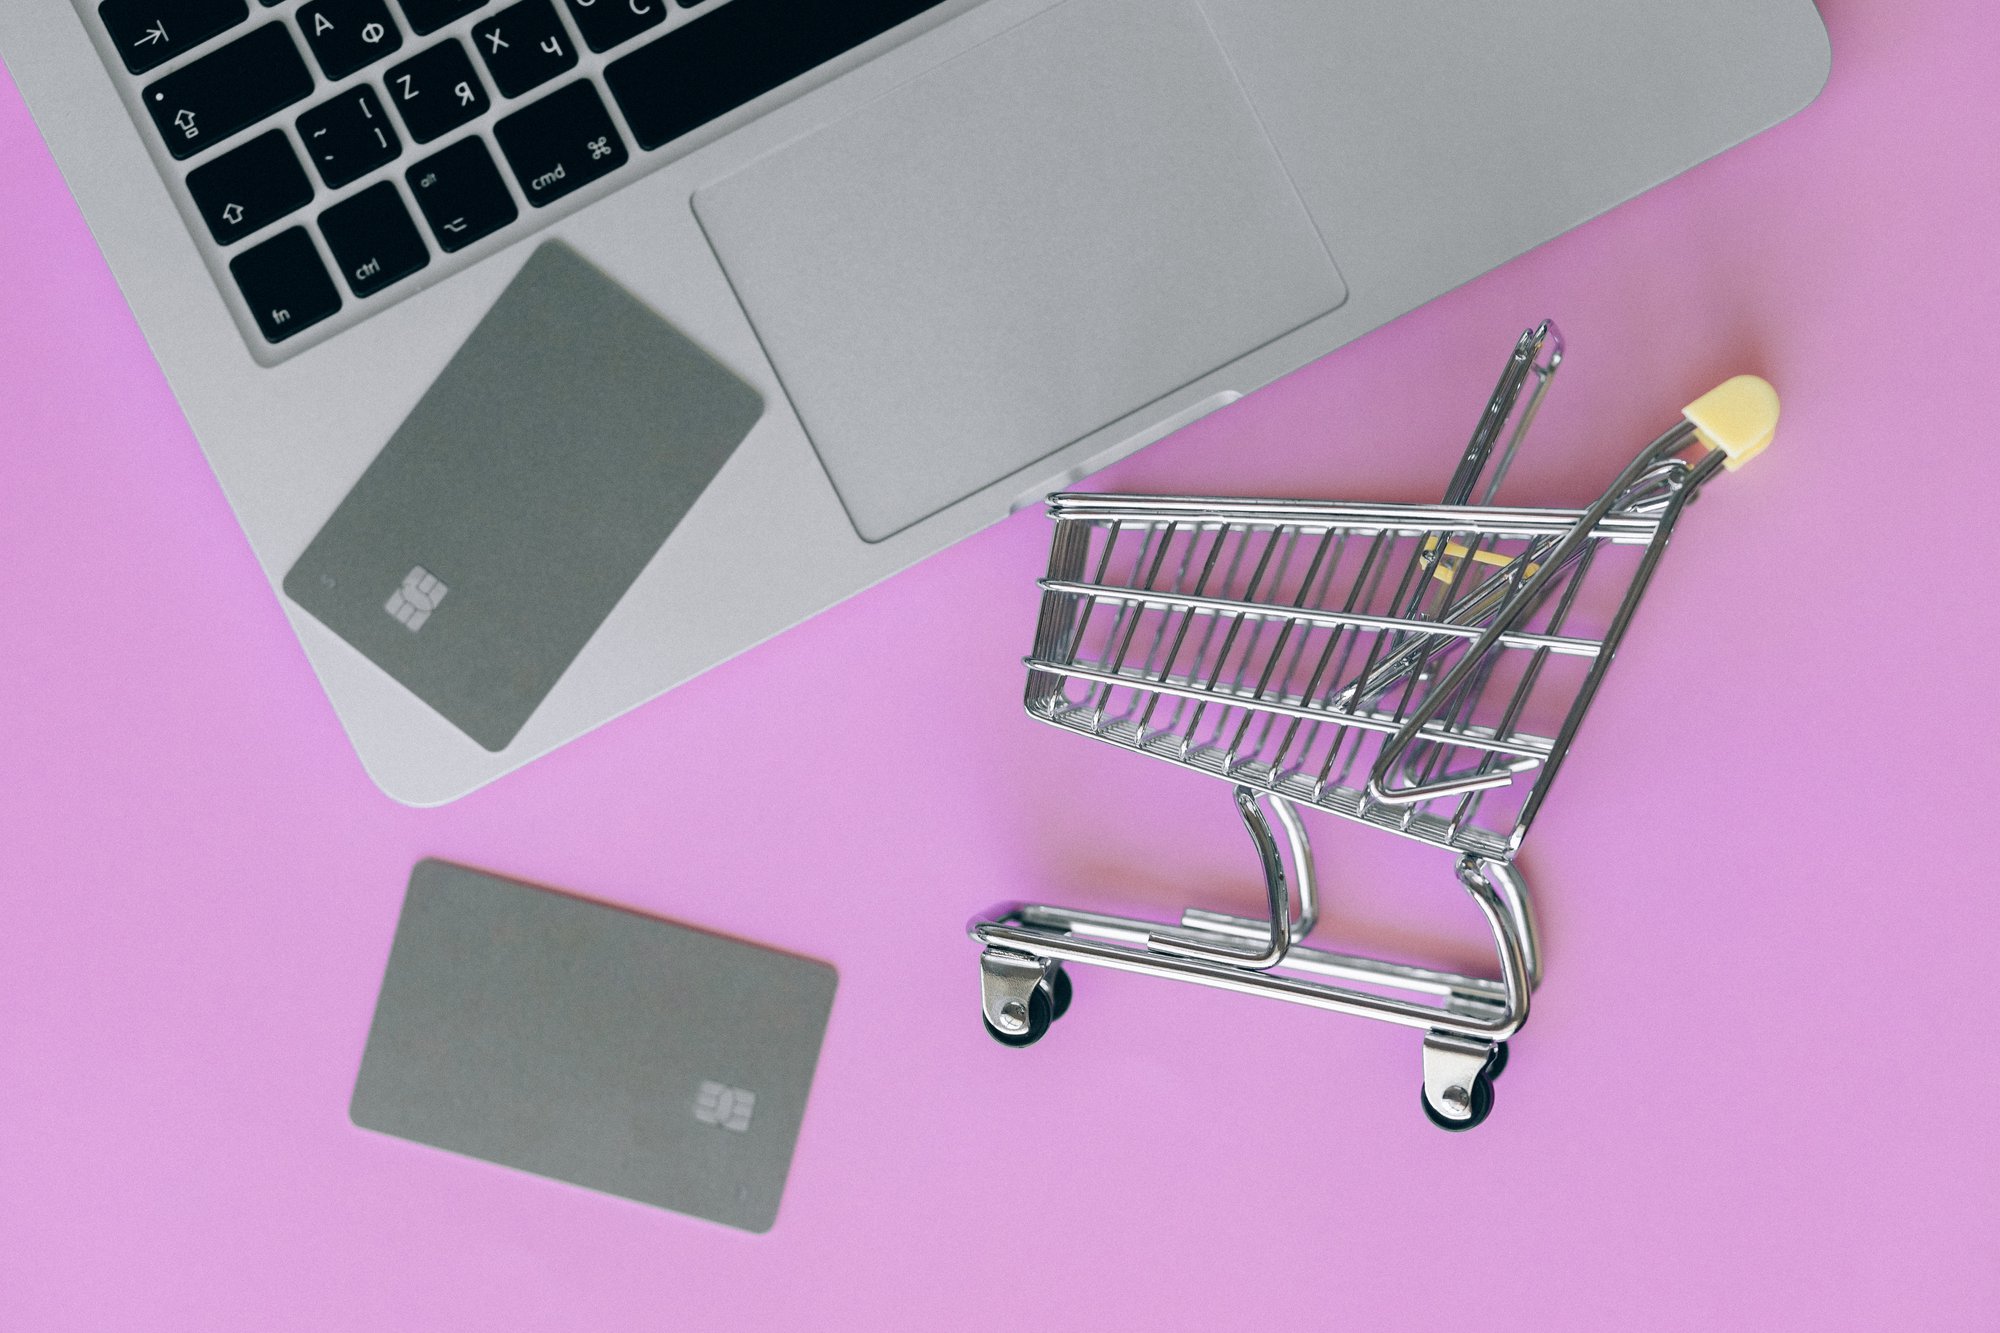 Use Analytics to Reduce Your Shopping Cart Abandonment Rate